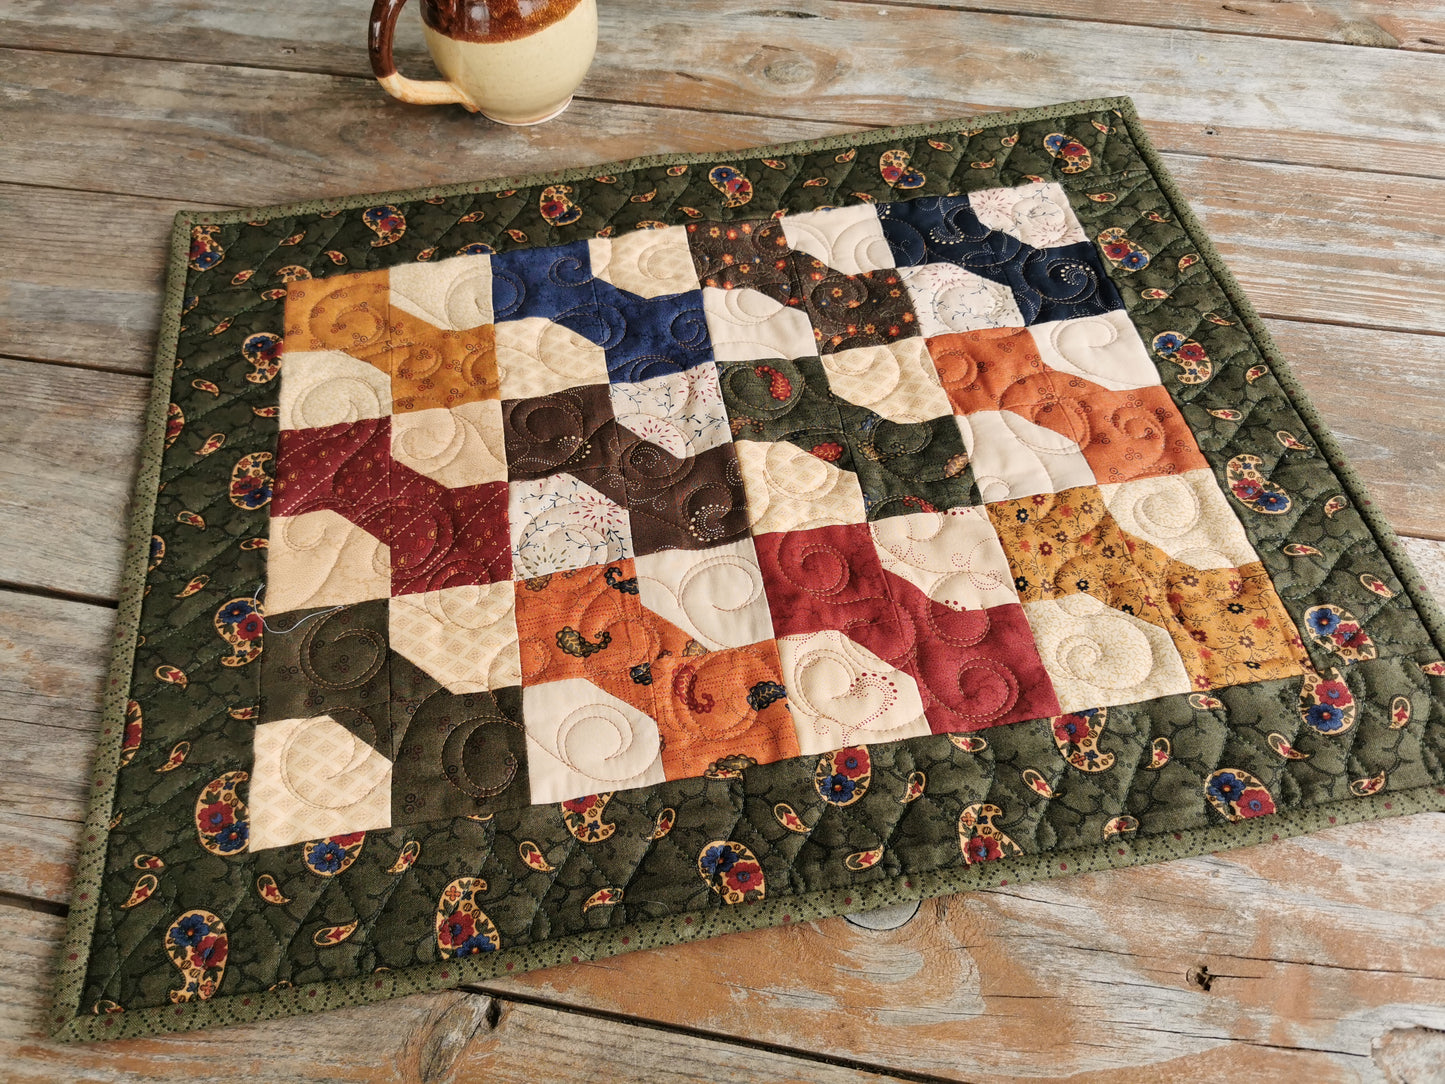 This quilted table runner has an outer border in a forest green paisley print. The patchwork bowties in the center are each a different dark tone colour, and come from a fabric collection called Paisley Park by Kansas Troubles. . Colours include country red, brown, dark blue, burnt orange, antique gold, deep green. The background is done in a scrappy style using various medium tone beige fabrics. A lovely country quilt.